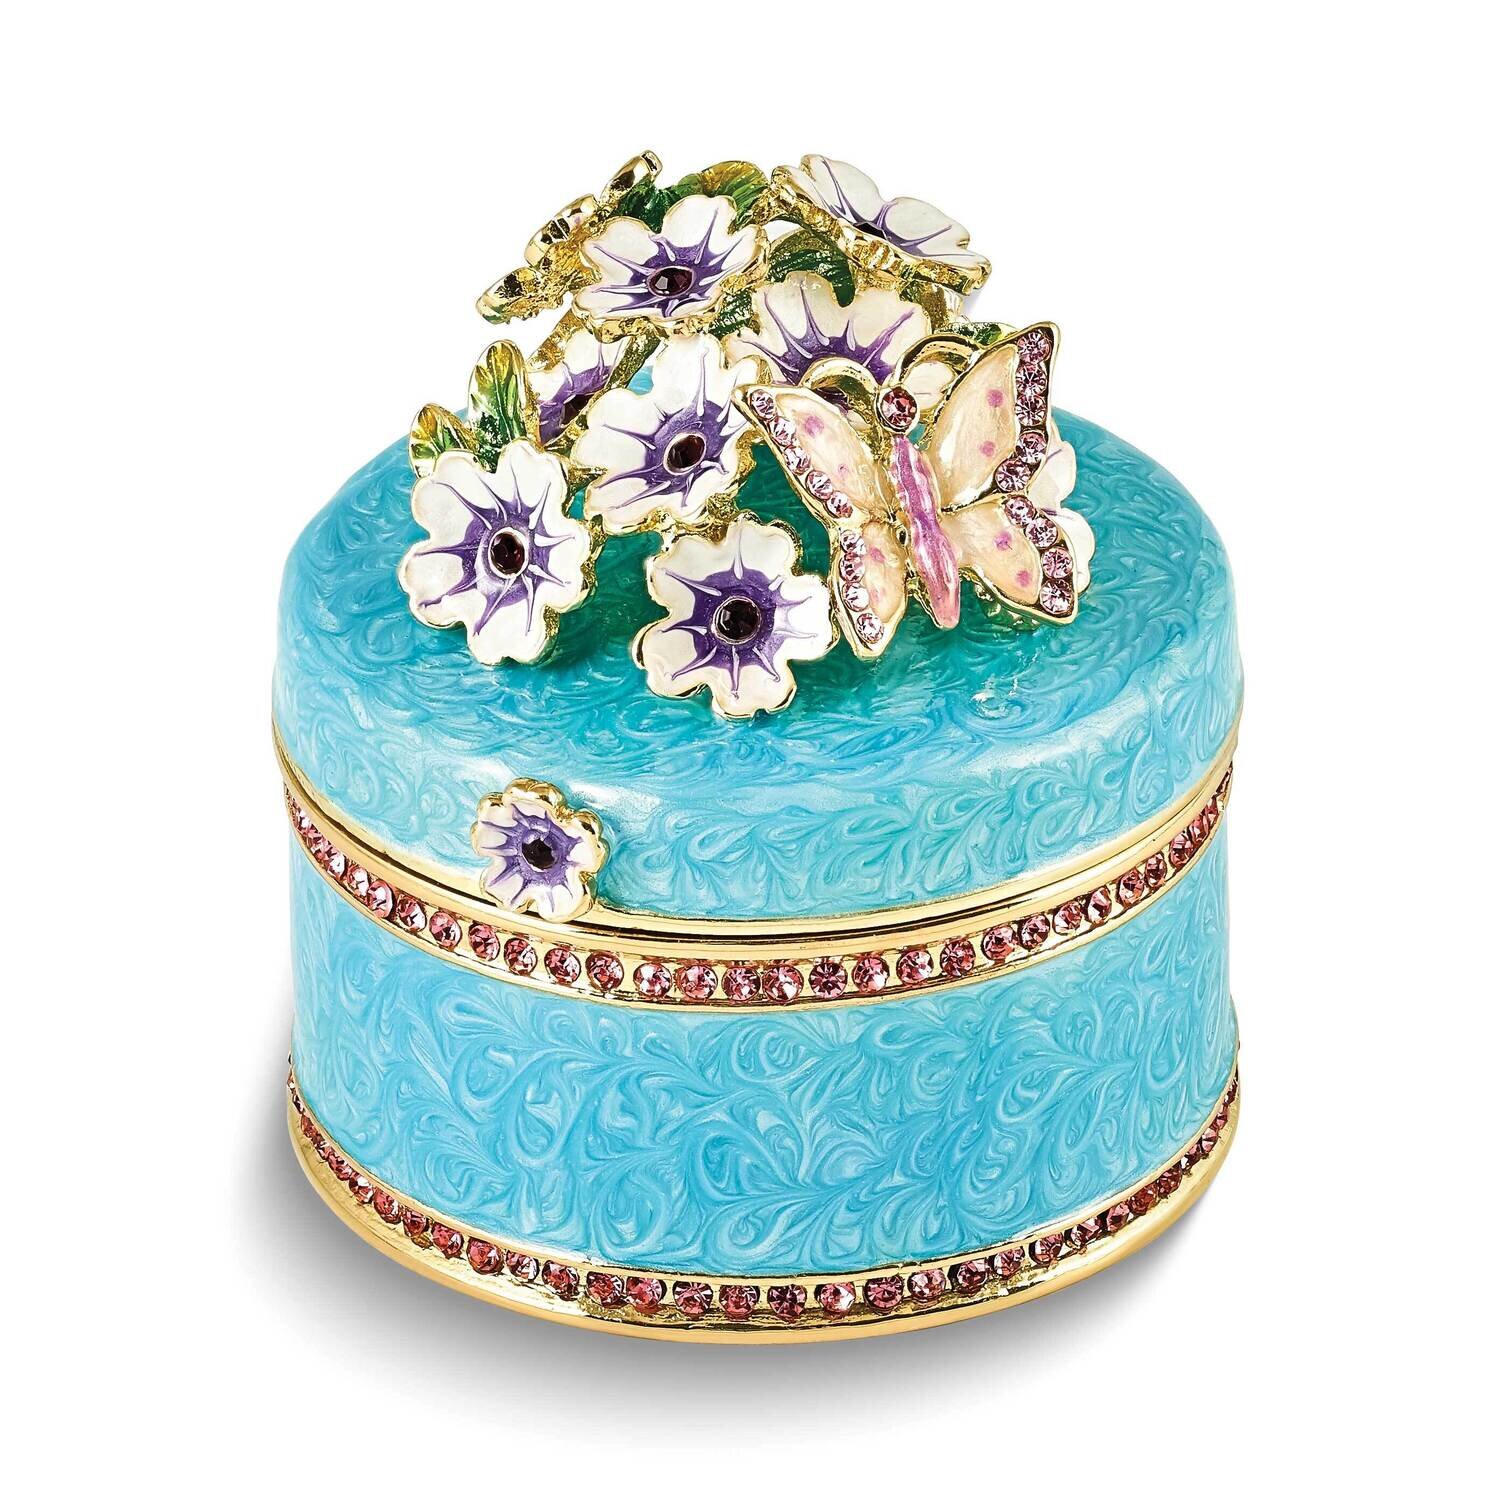 By Jere BUTTERFLY NECTAR Blue Flower Butterfly Ring Holder Trinket Box with Matching 18 Inch Necklace Pewter Bejeweled Crystals Gold-tone Enameled BJ4175